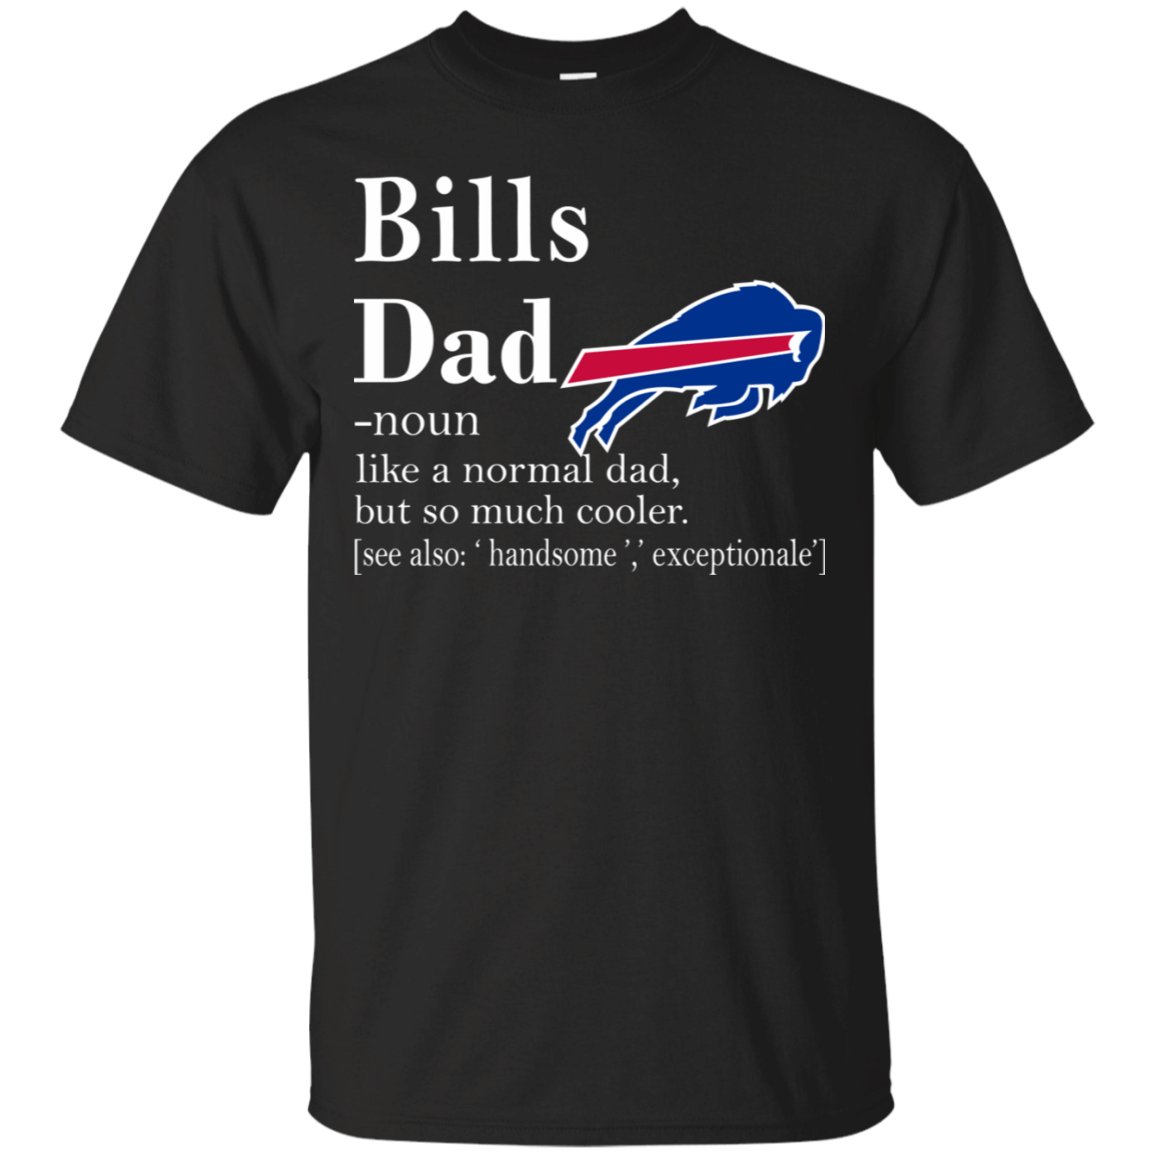 BUFFALO-BILLS-Like-A-Normal-Dad-But-So-Much-Cooler-Cotton-T-SHIRT-FOR-FAN-2023